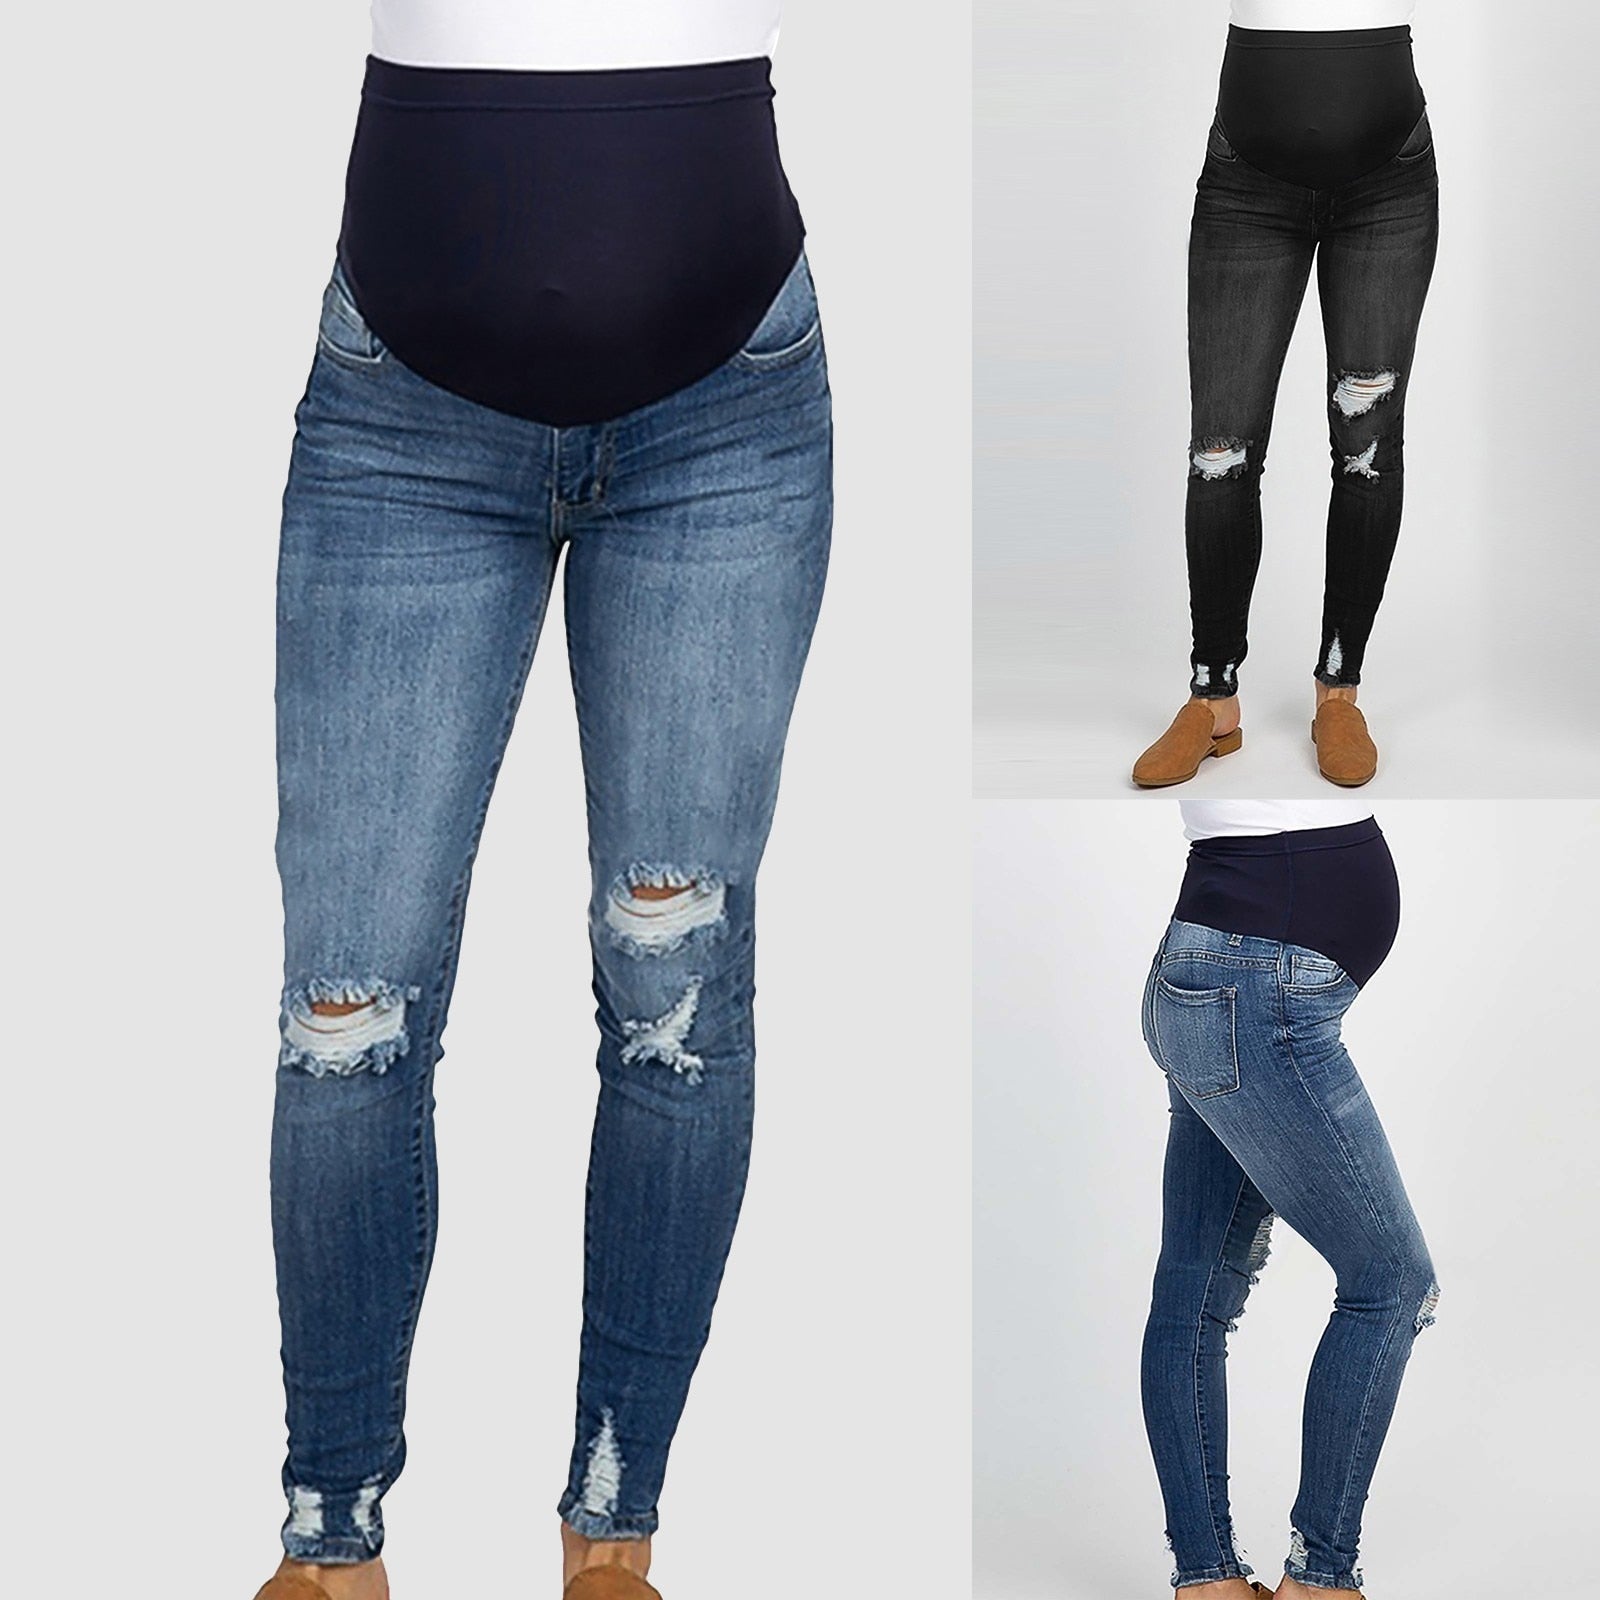 Pants Maternity Jeans High Waist Belly Skinny for Pregnant